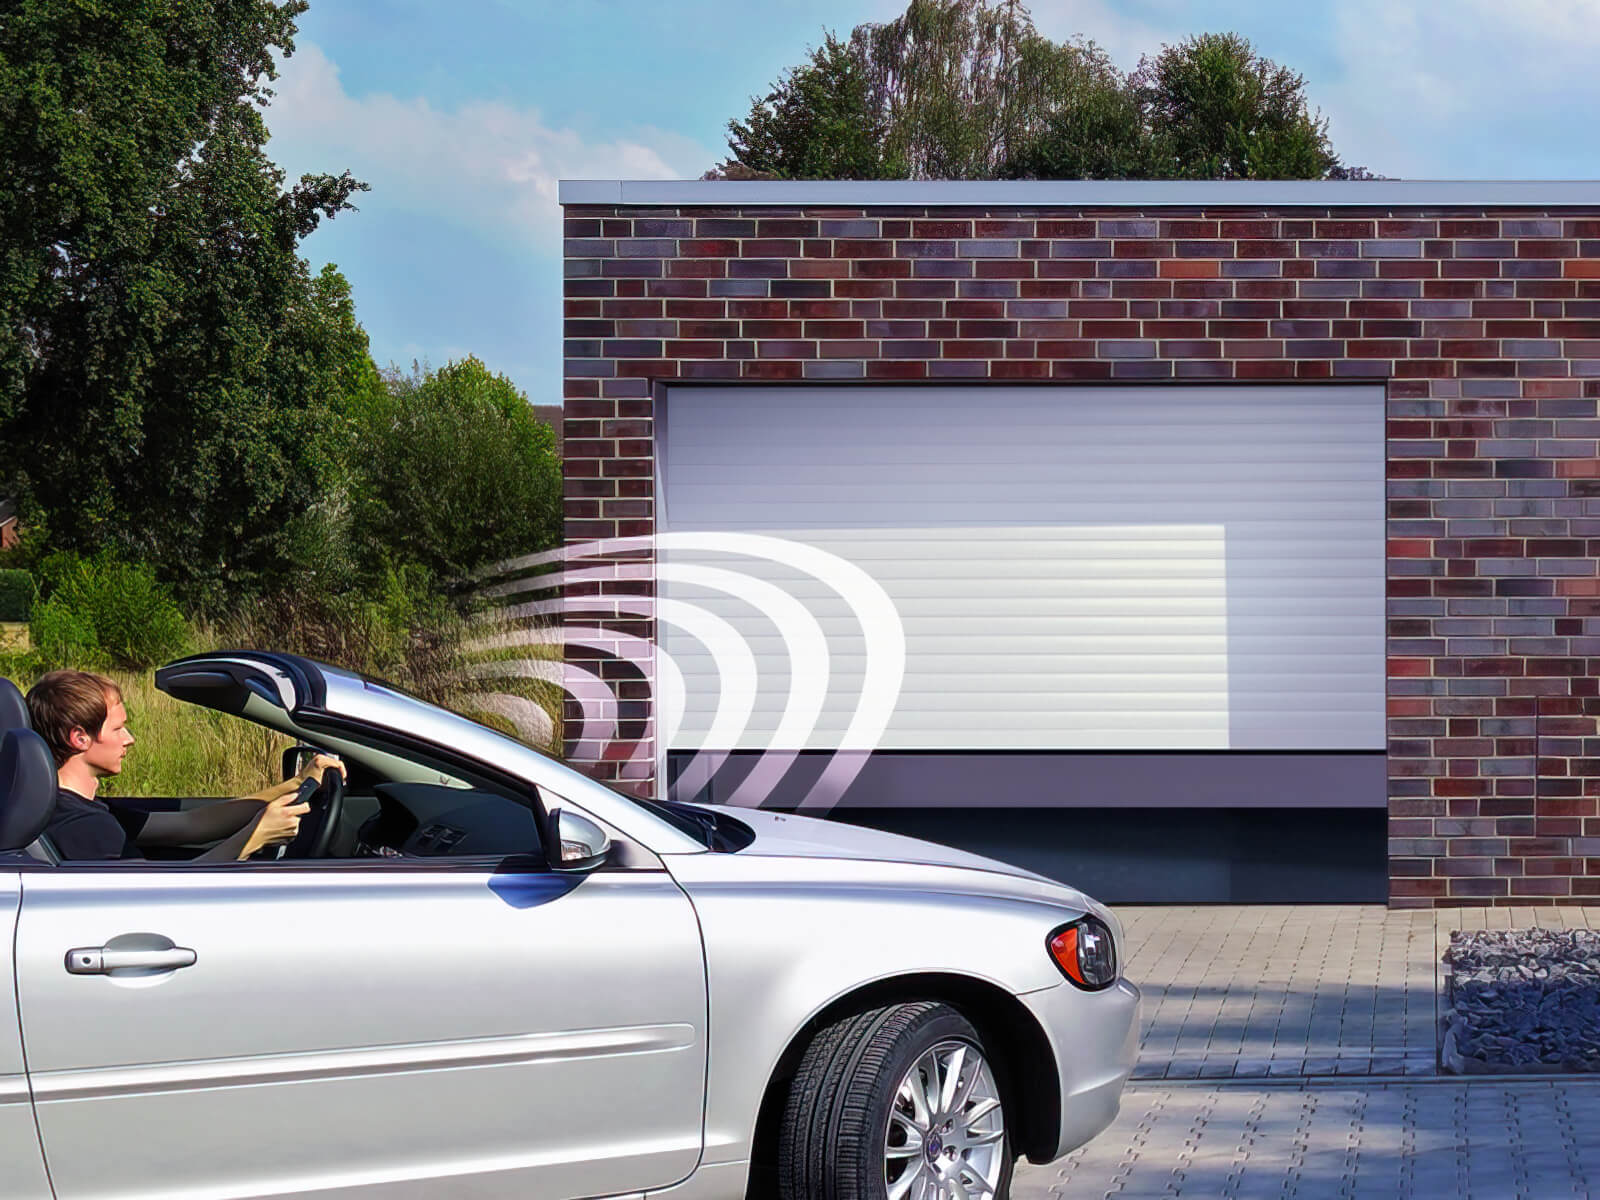 Professional Seaton Electric Garage Door Automation company